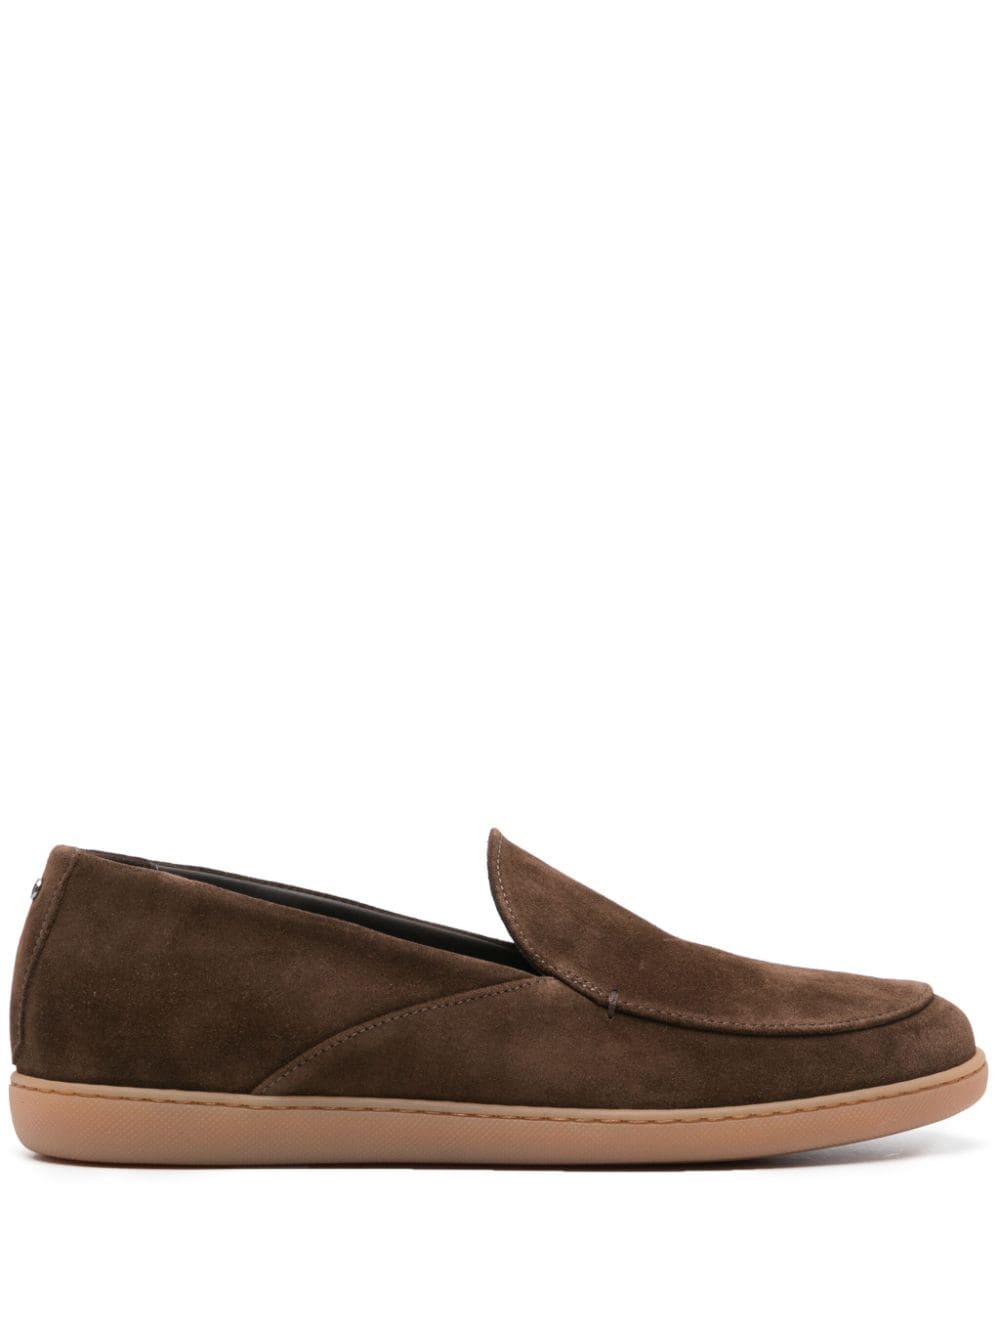 Canali Slip-on Suede Loafers In Brown